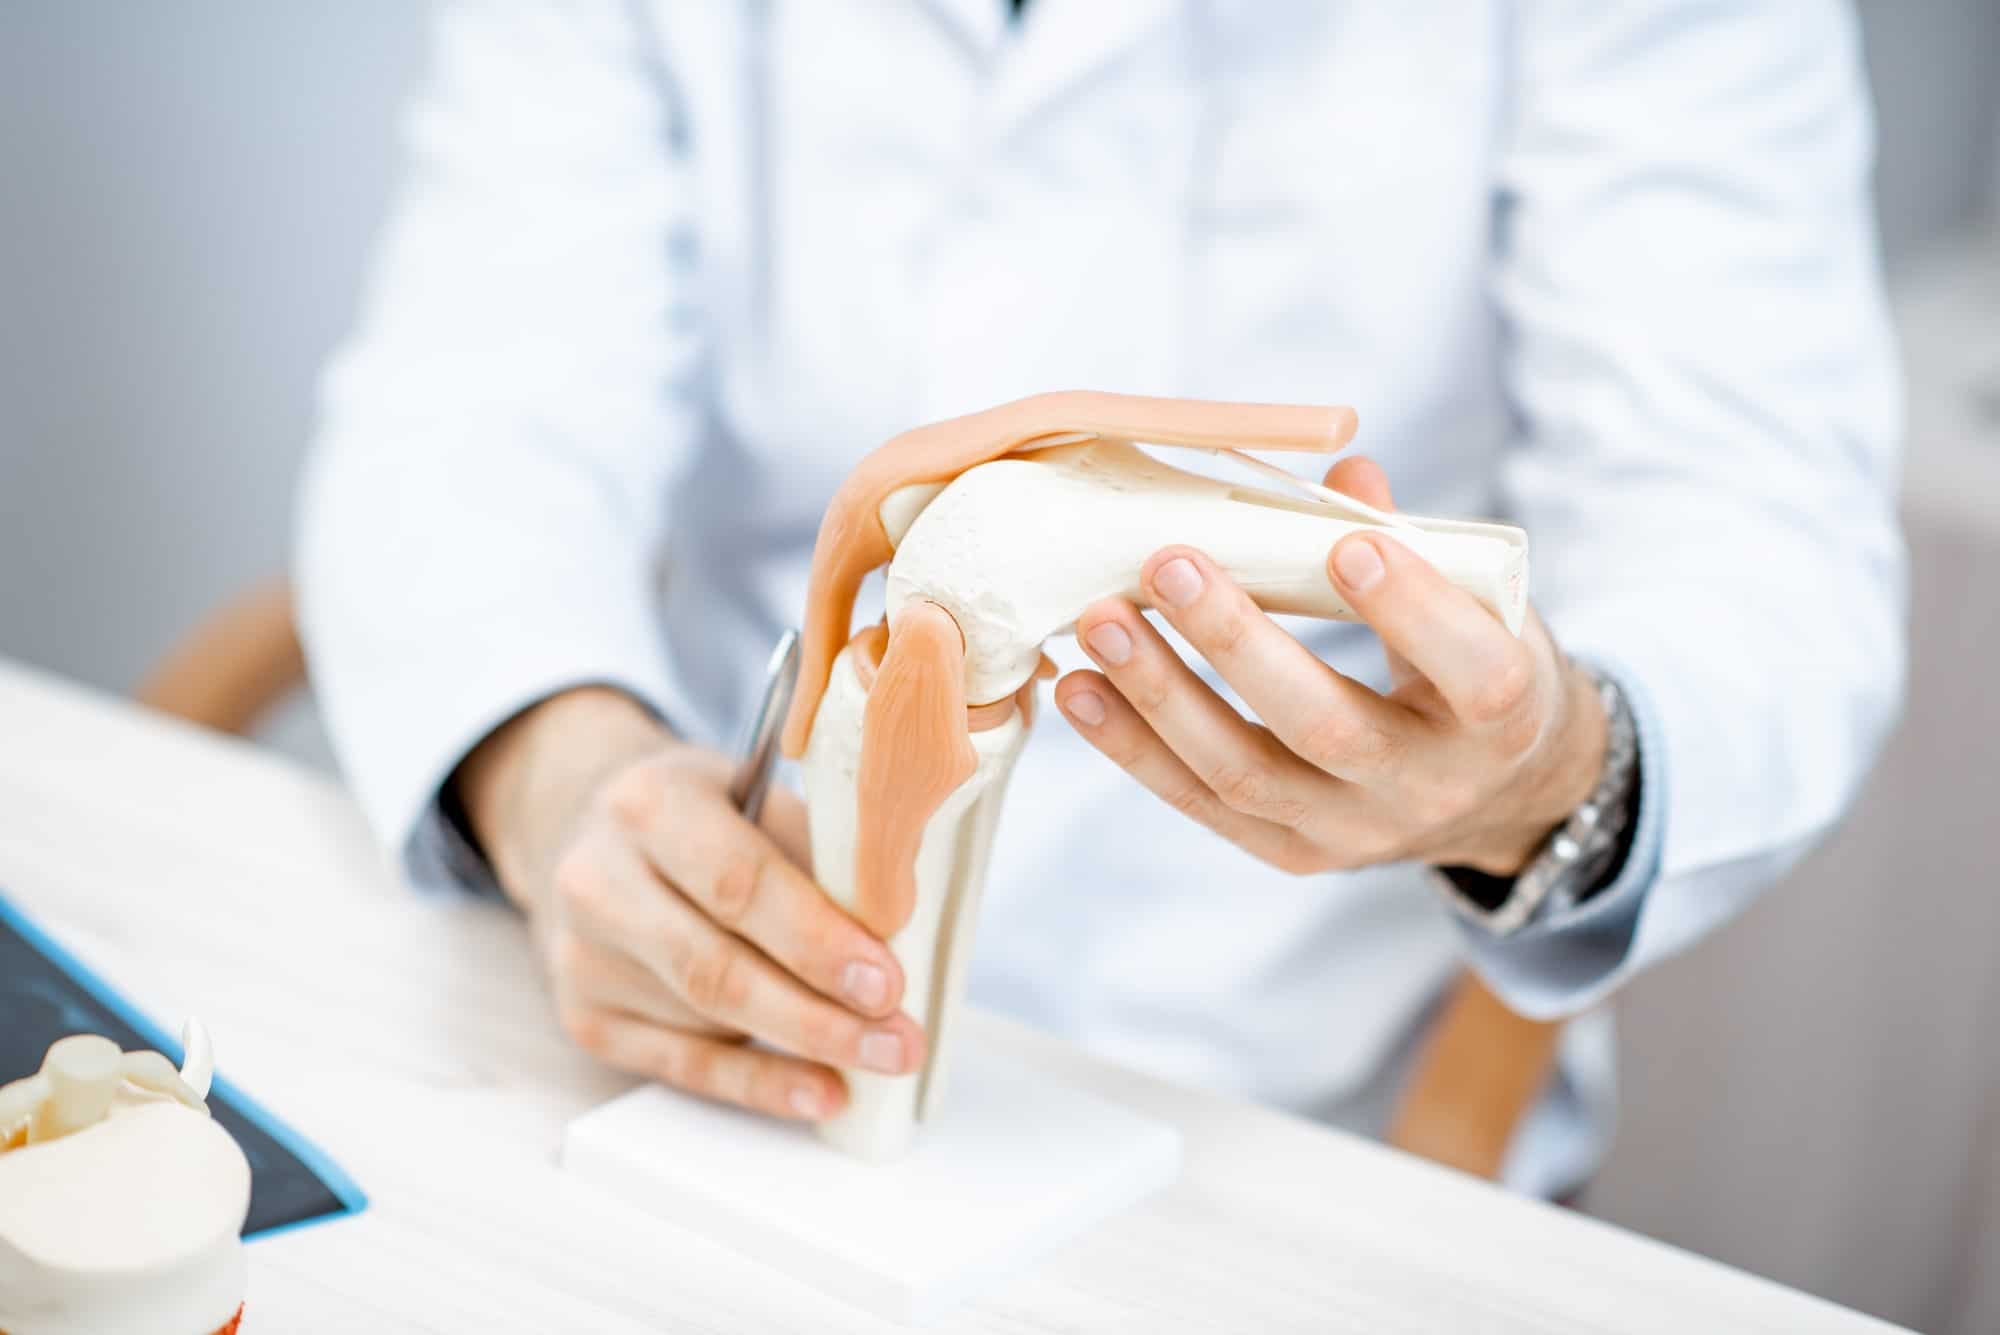 Therapist showing knee joint model